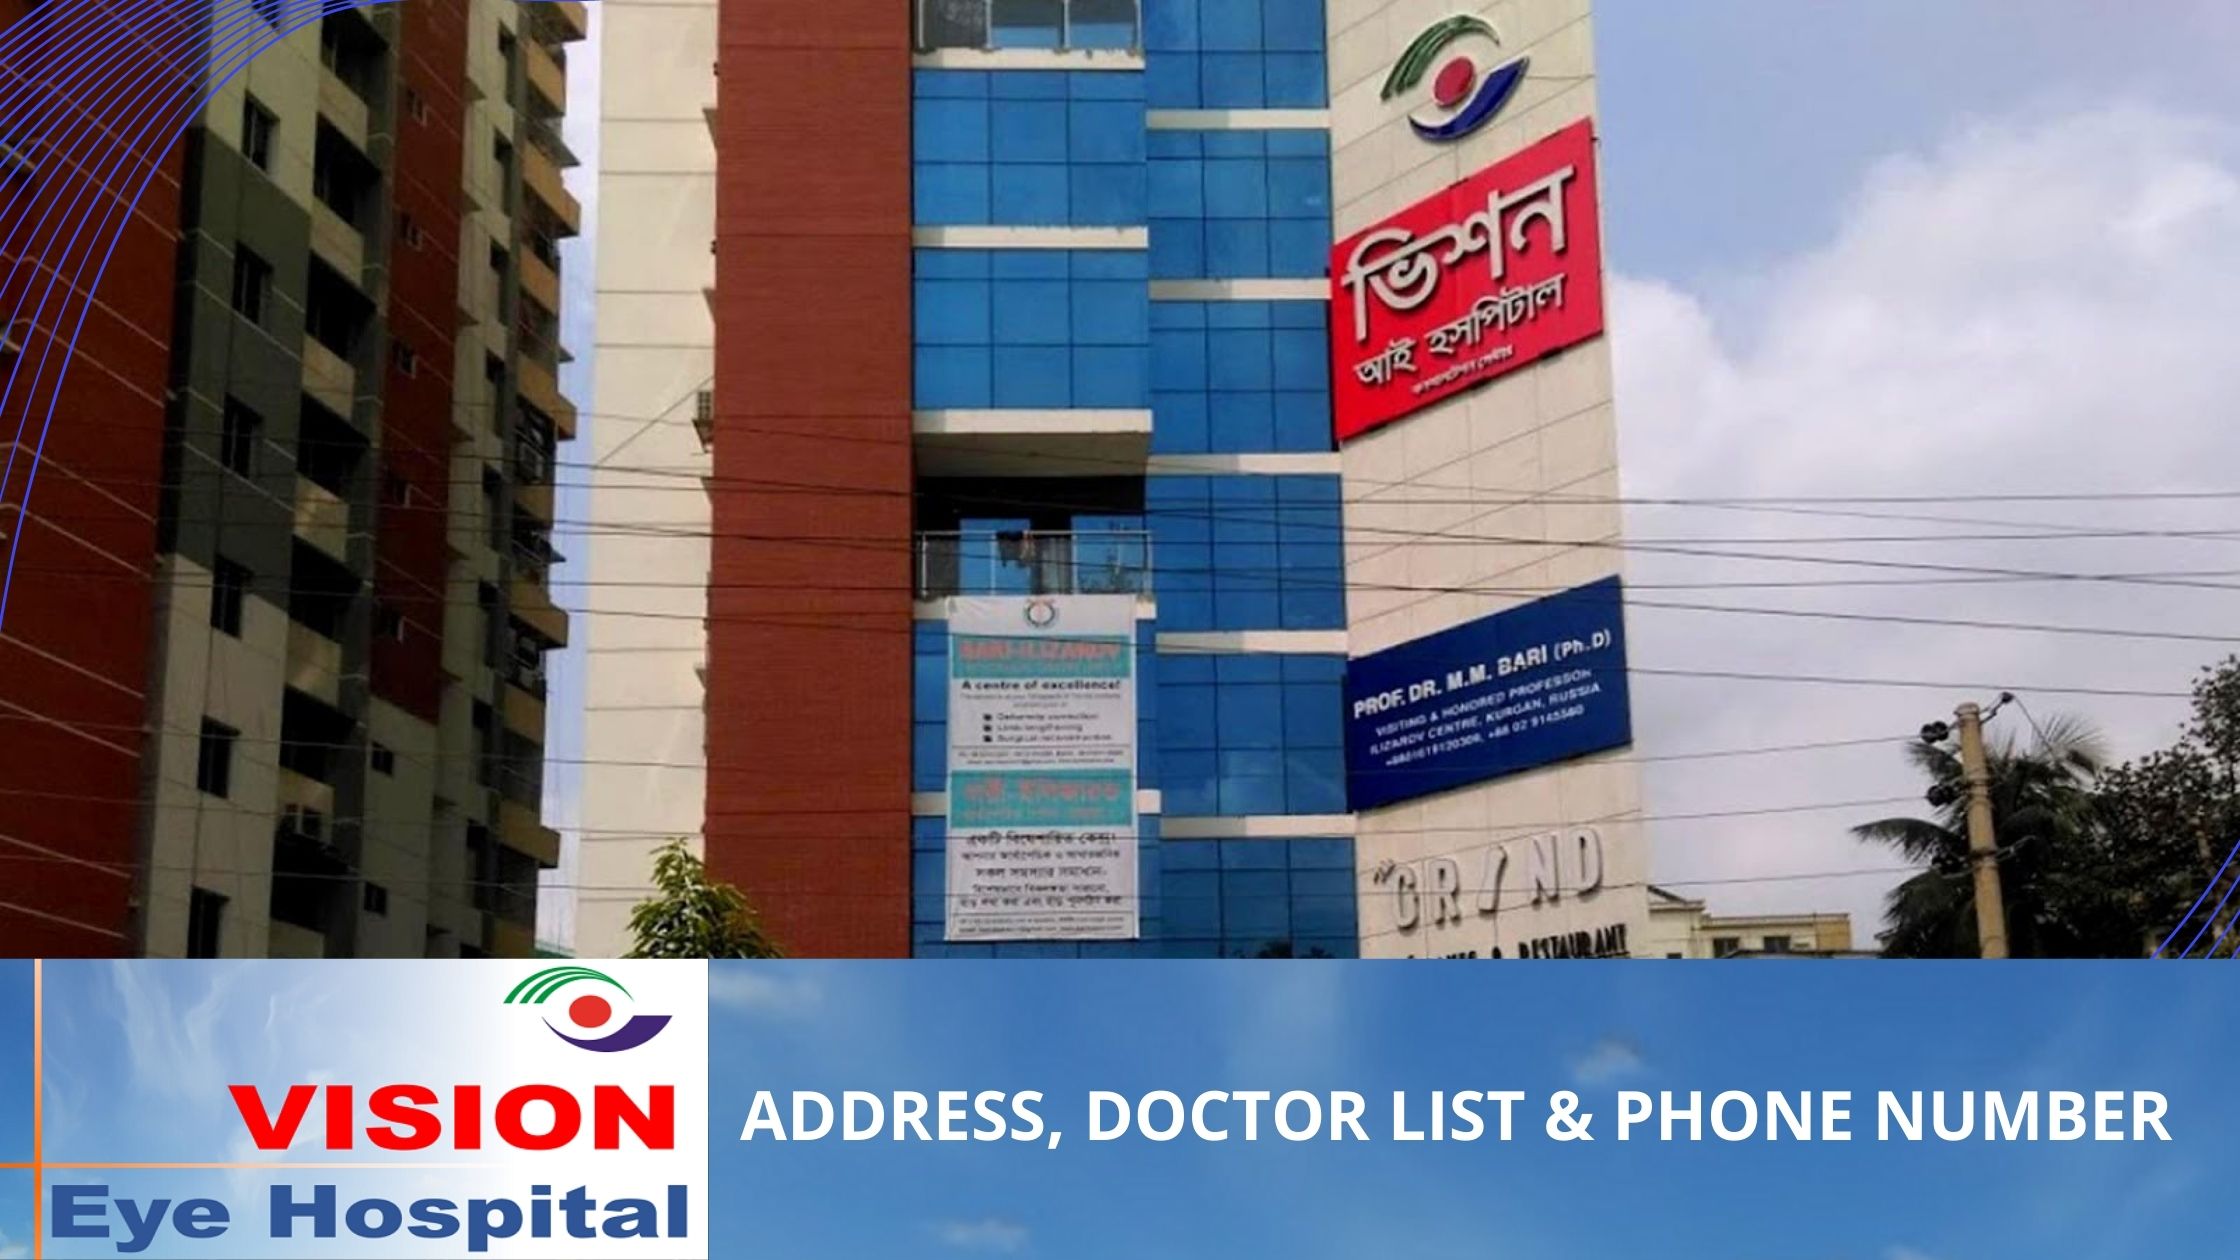 VISION EYE HOSPITAL DOCTOR LIST ADDRESS & CoNTACTS